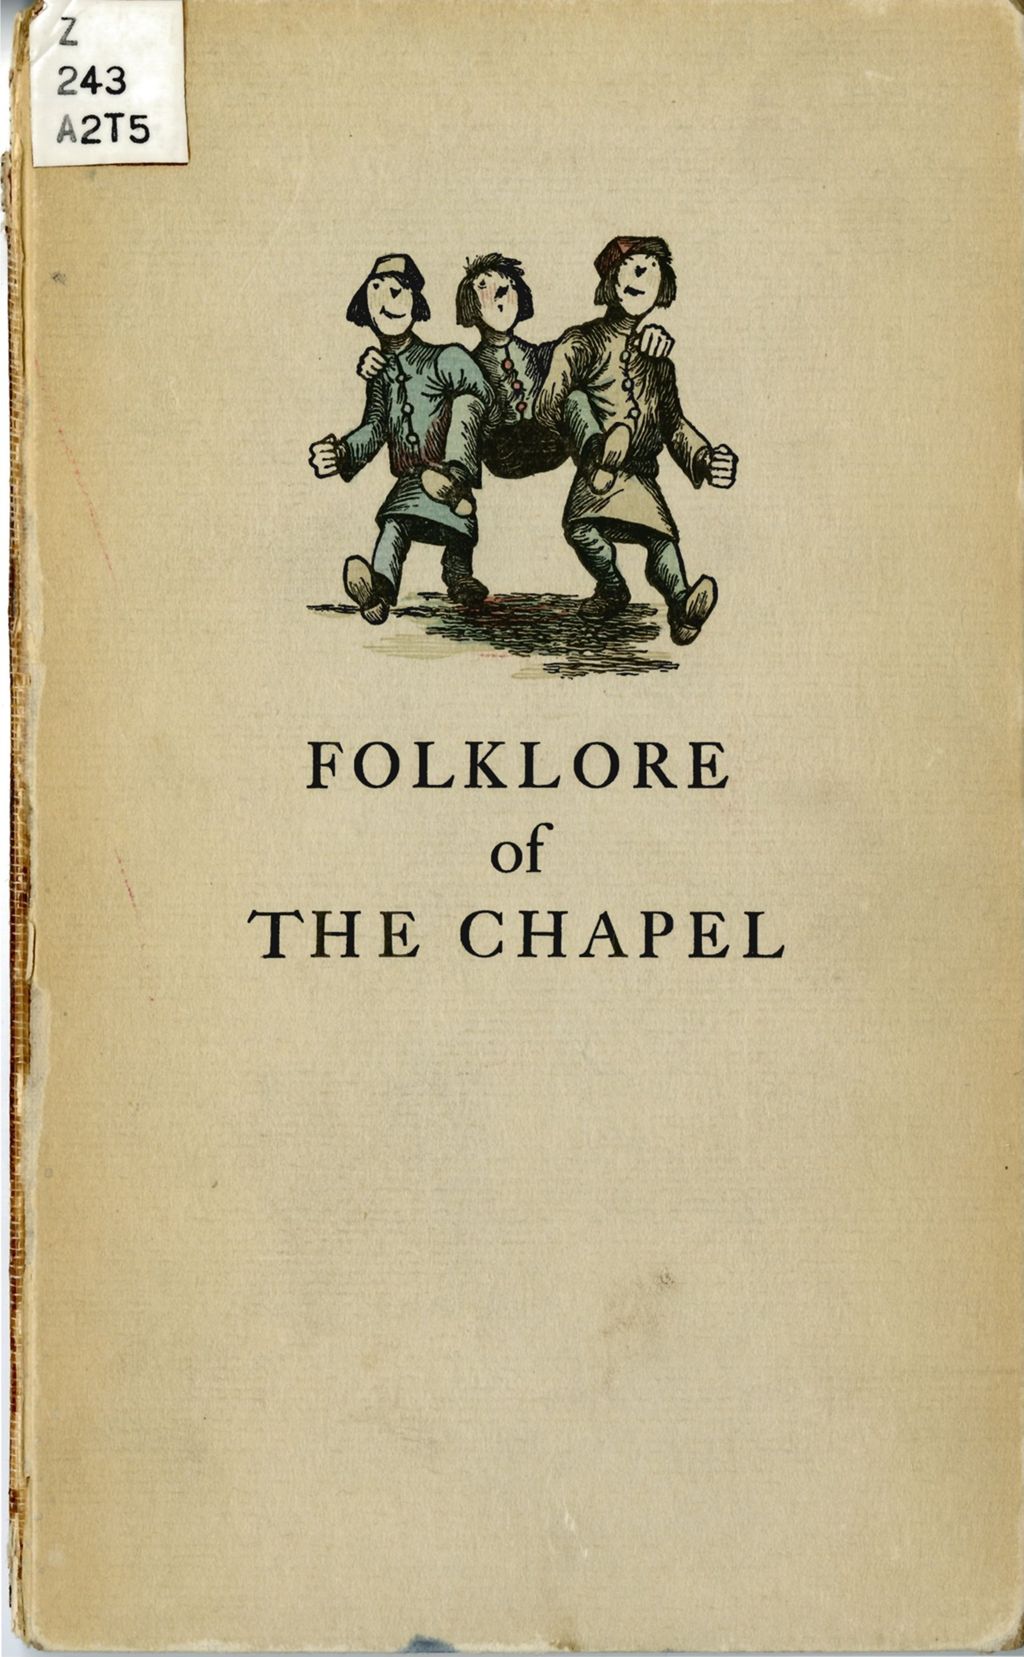 Miniature of Folklore of the Chapel